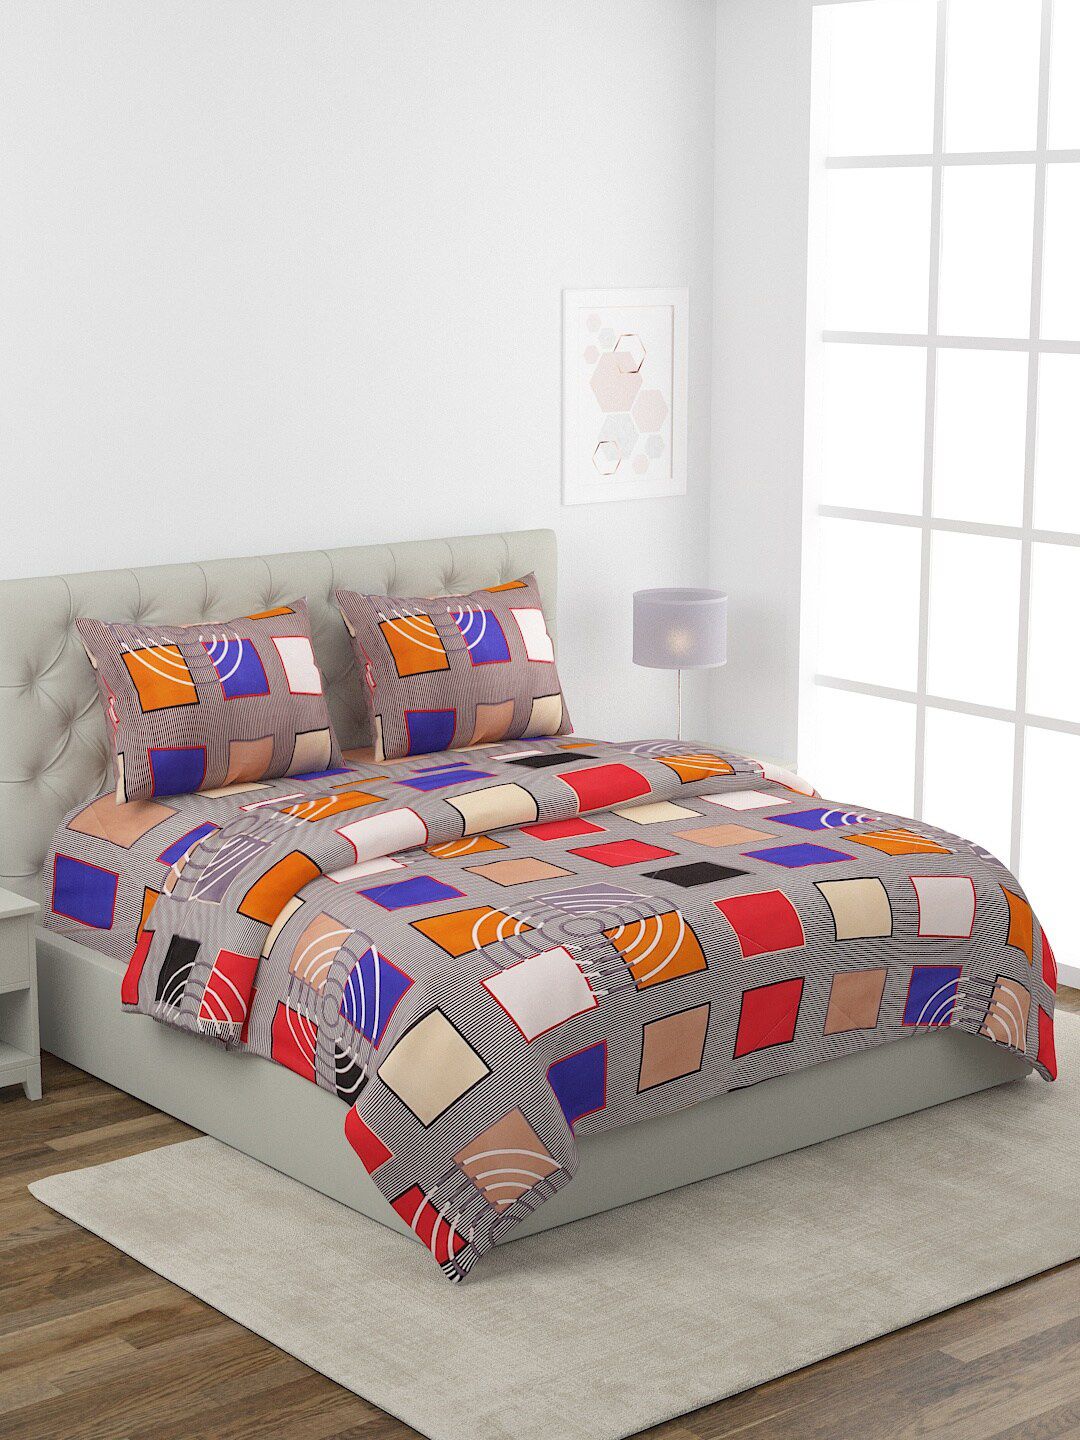 ROMEE Multi-Coloured Printed Cotton Double King Bedding Set With Comforter Price in India